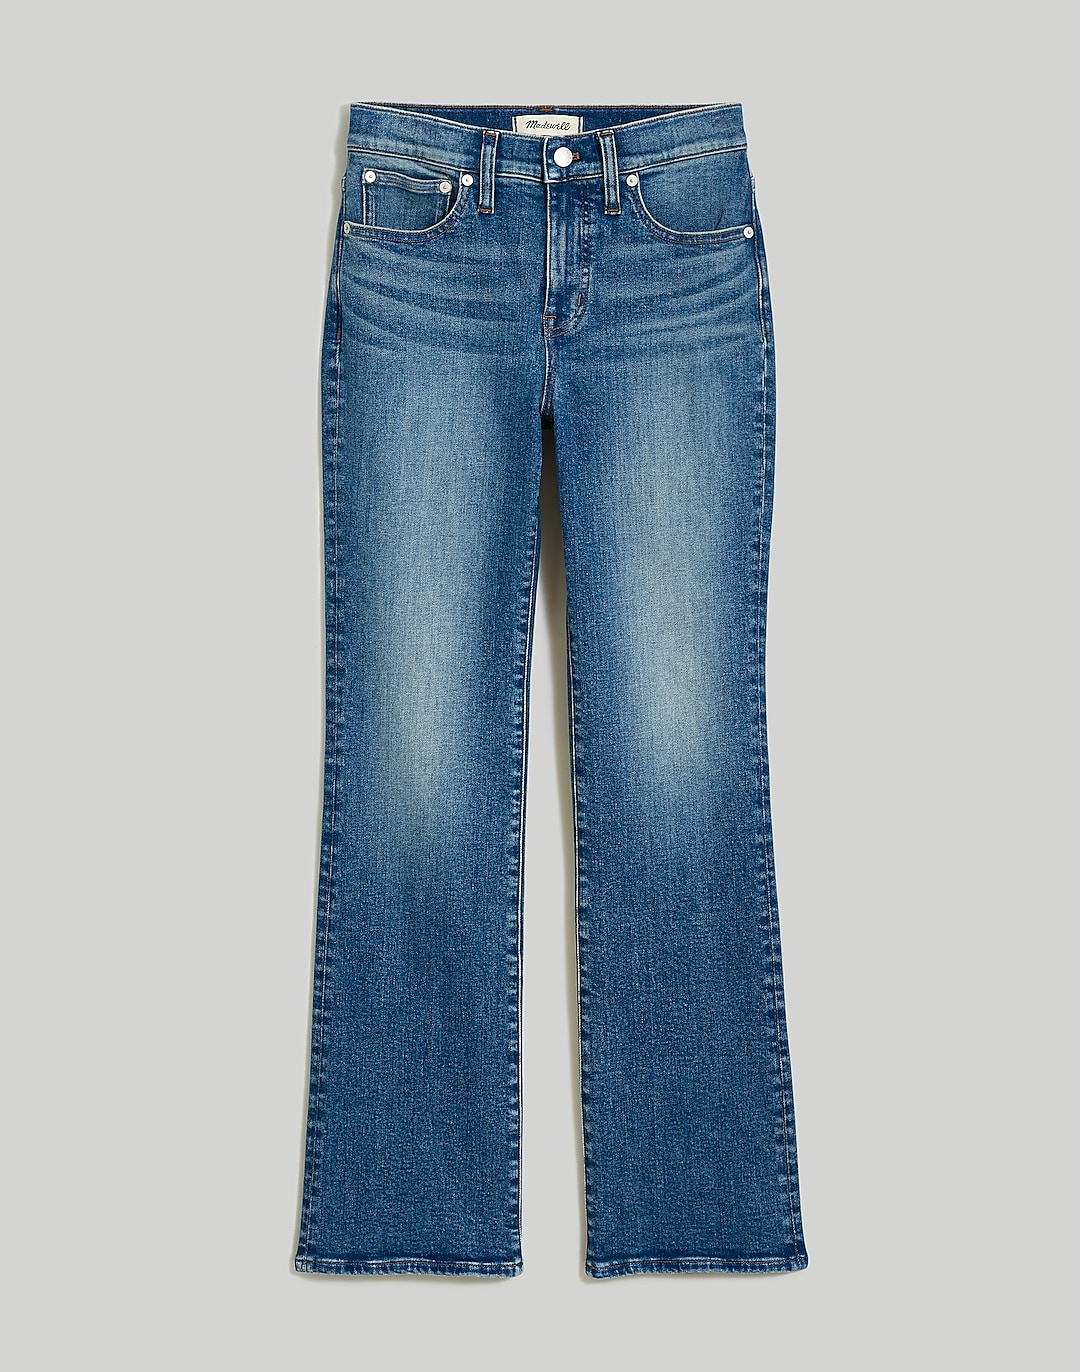 Curvy Kick Out Crop Jeans in Oneida Wash | Madewell